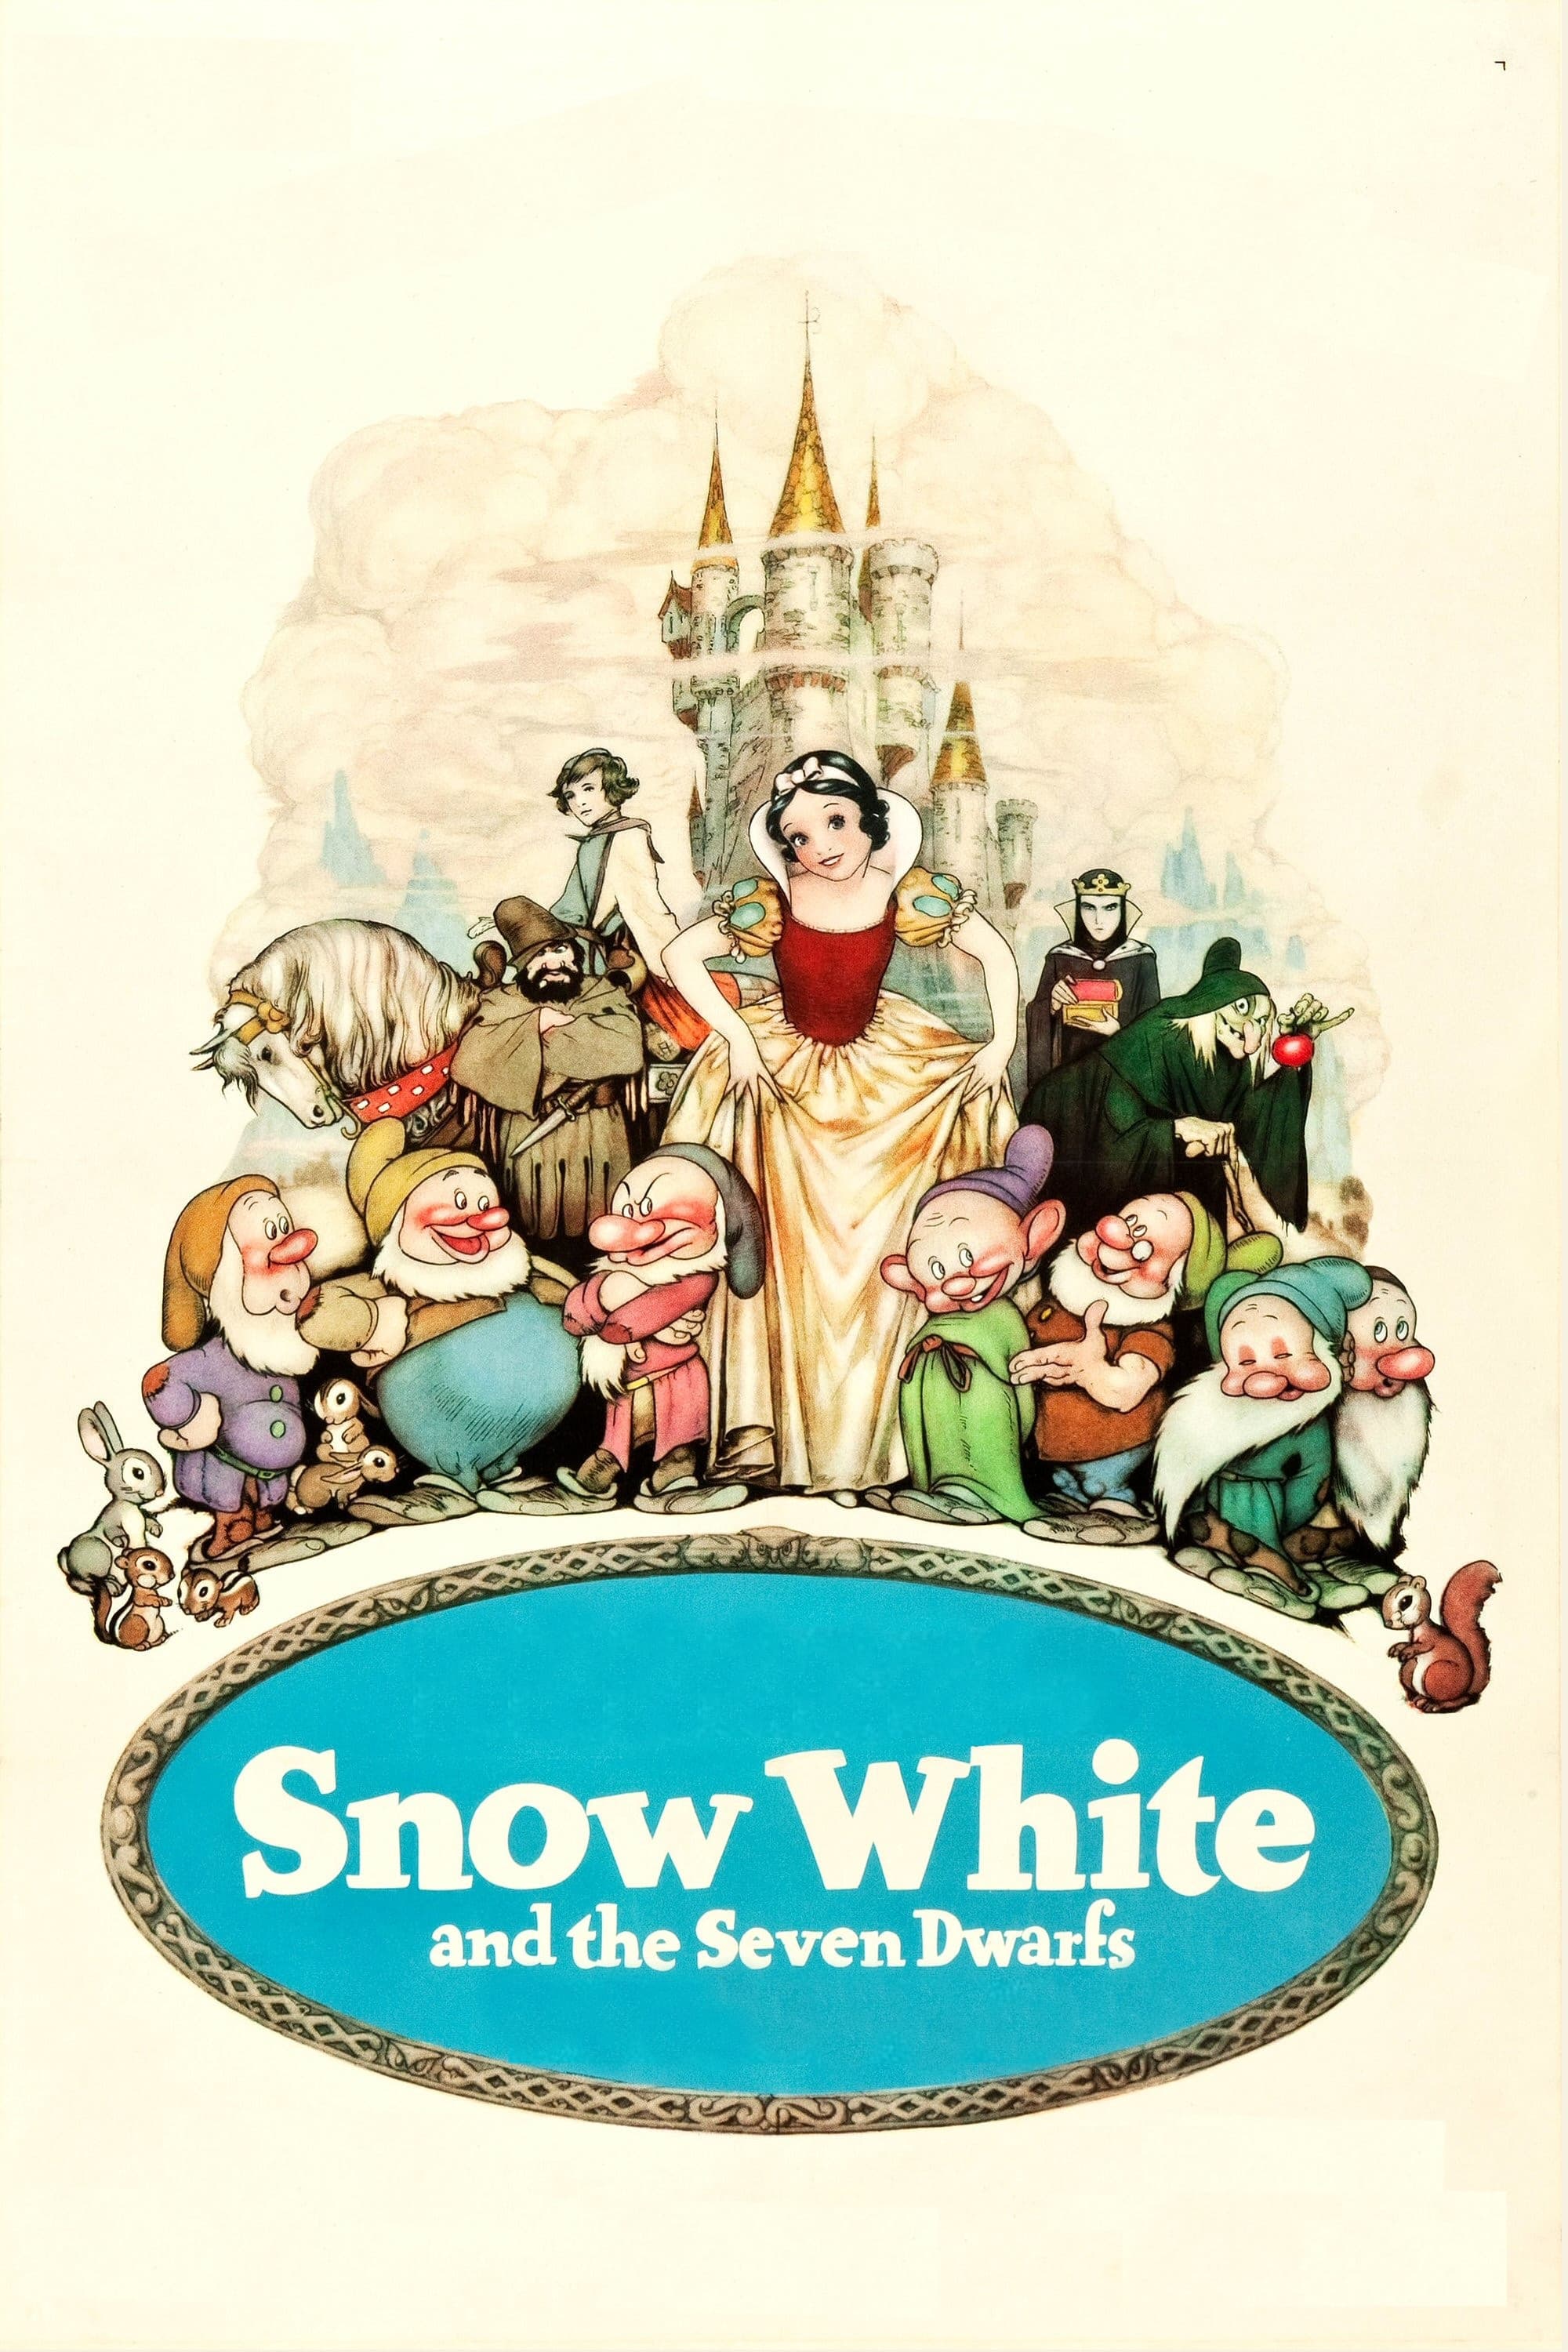 Snow White and the Seven Dwarfs Movie poster